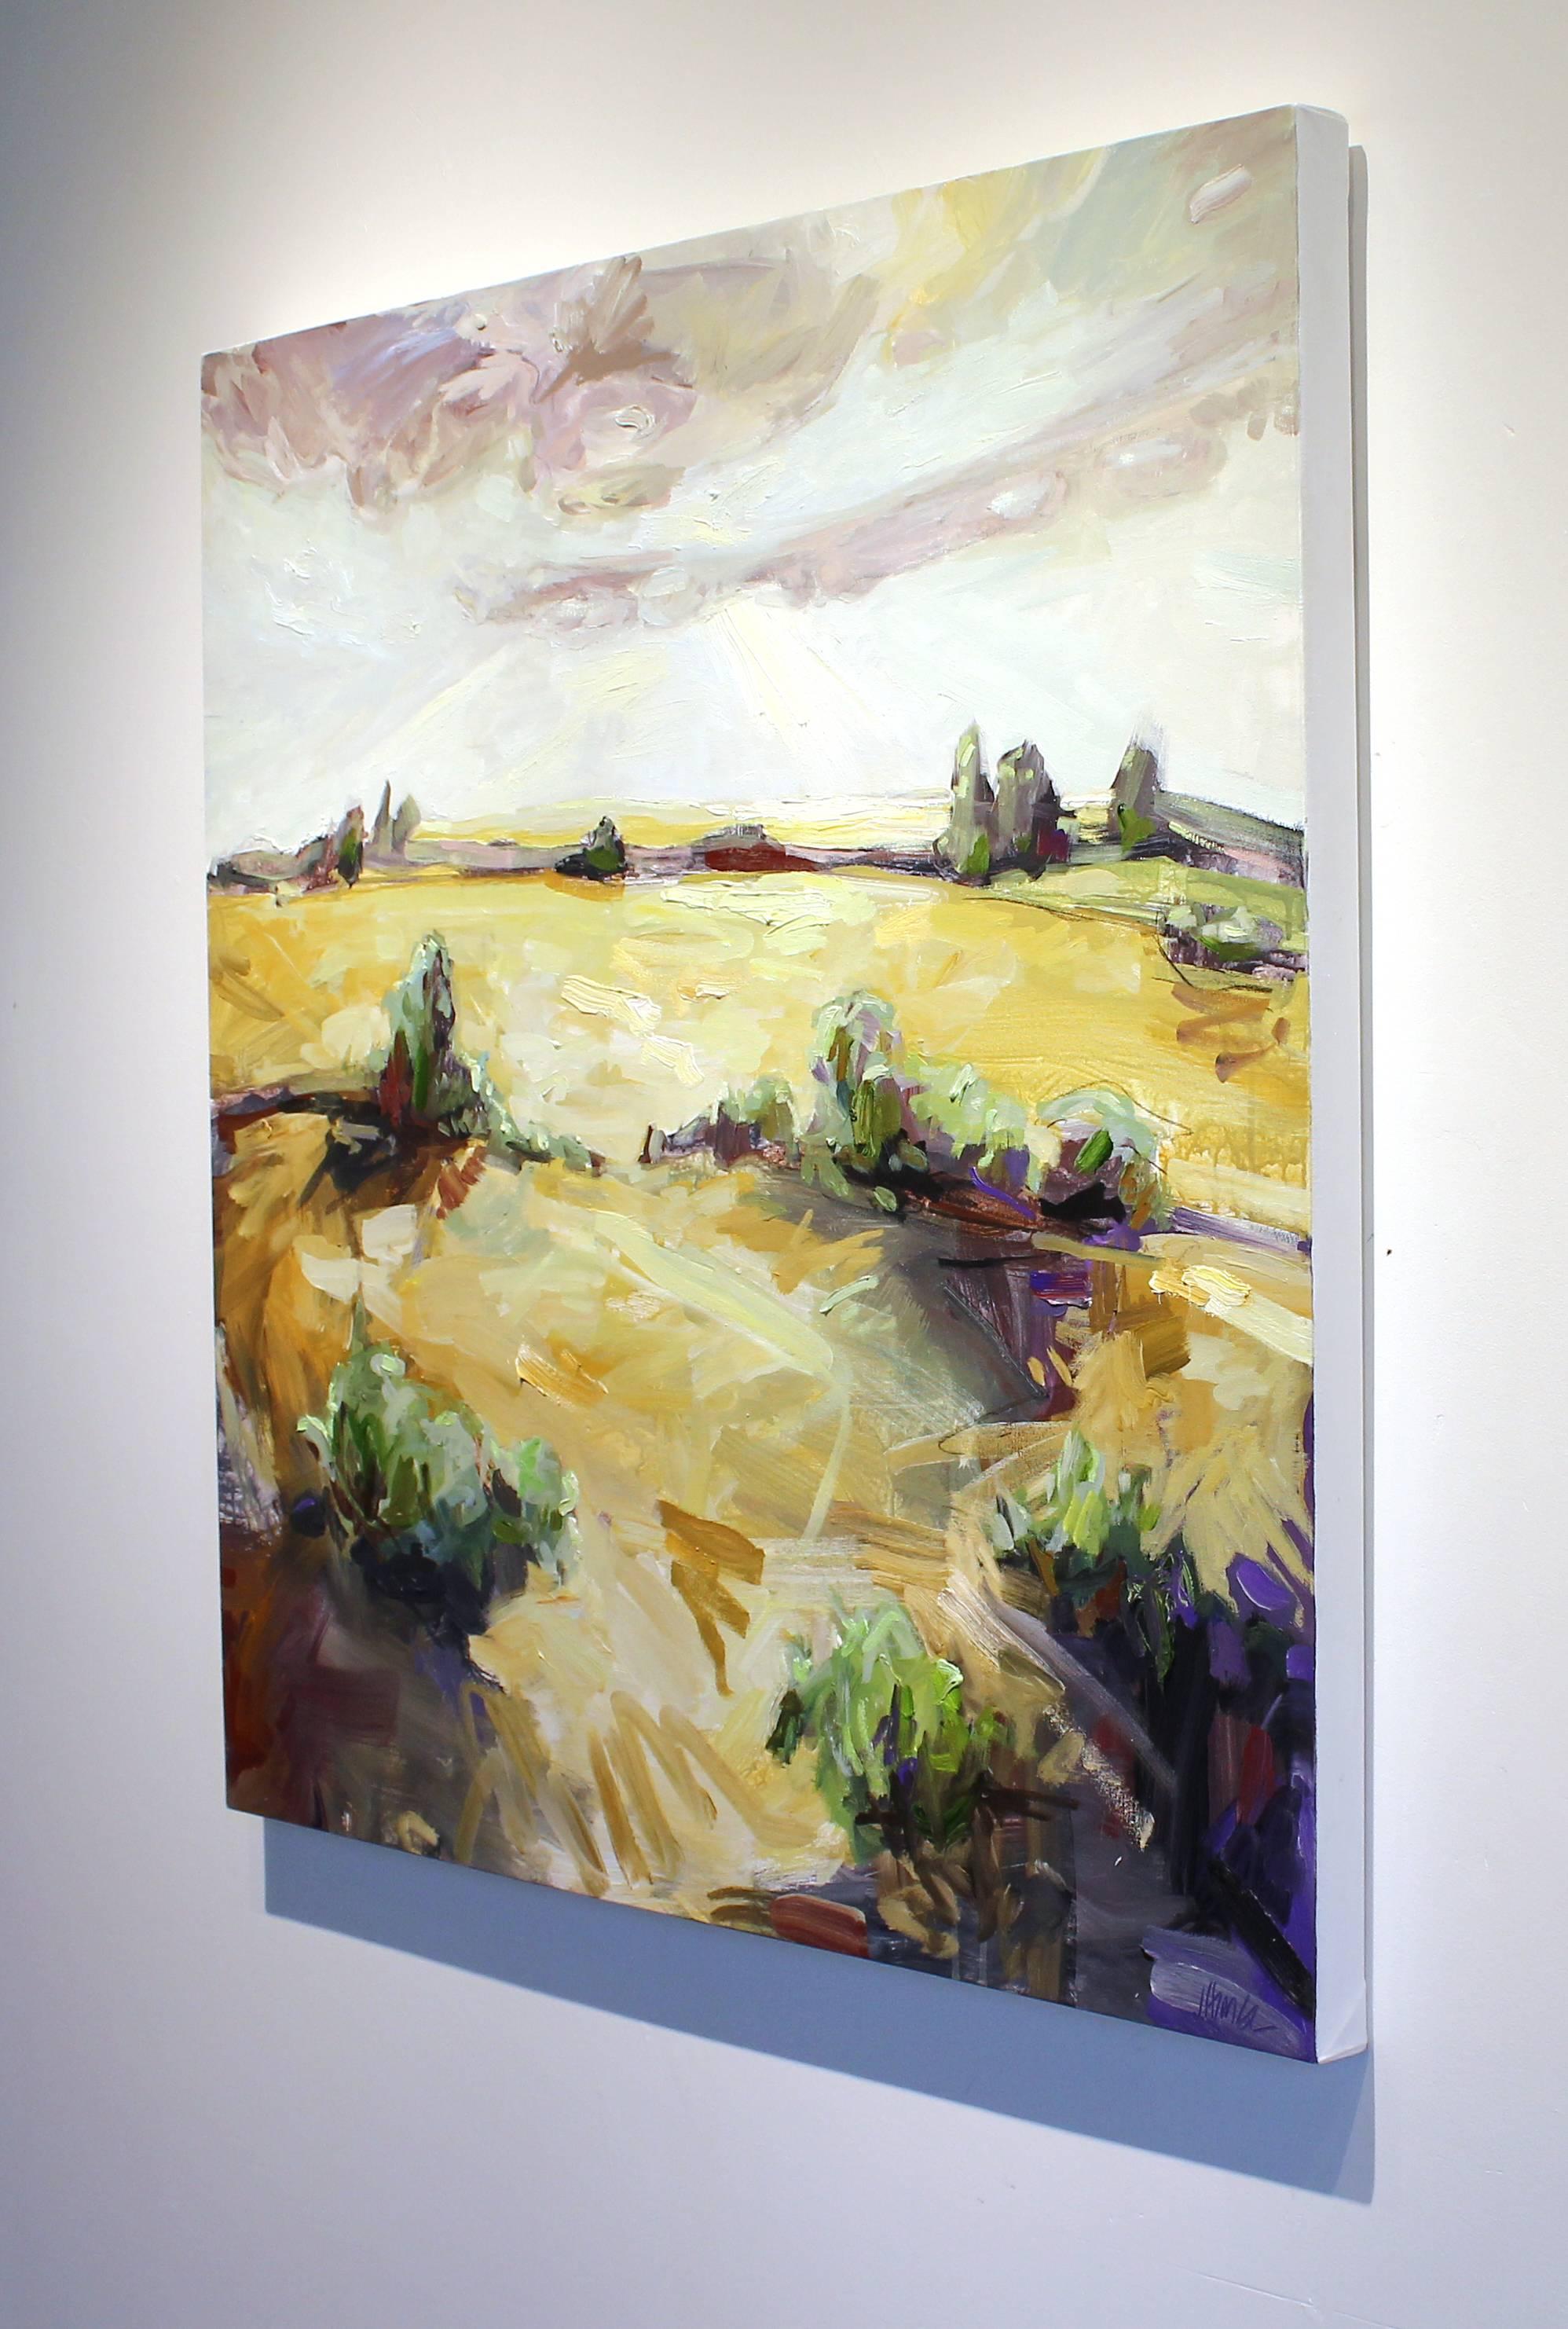 Enduring, oil and acrylic landscape painting on canvas - Contemporary Painting by Julie Himel